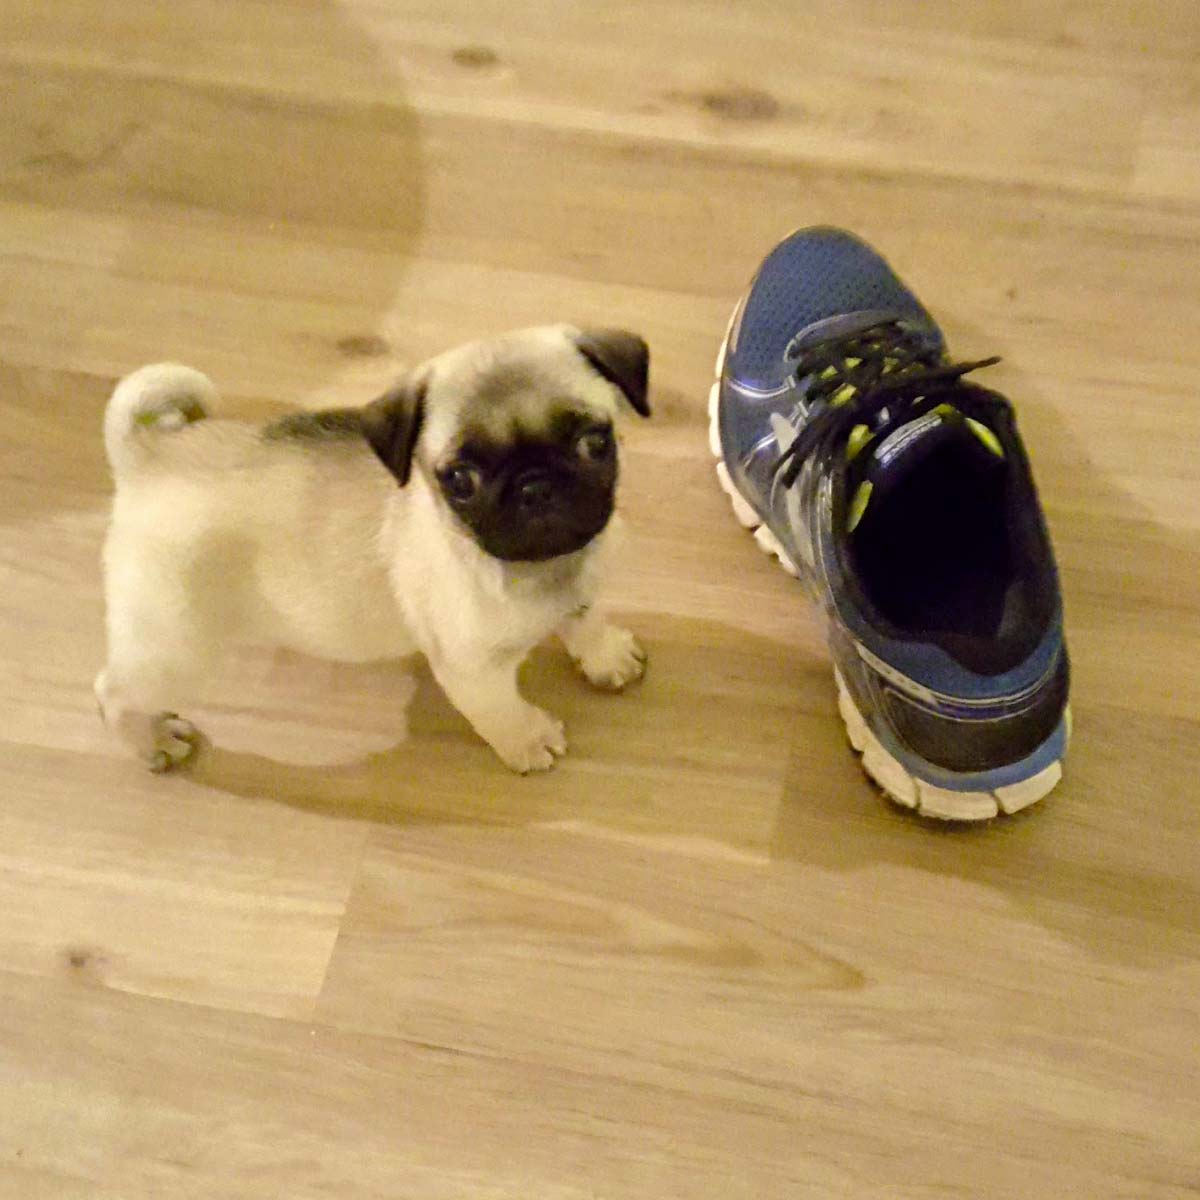 Cute Puppy with a Shoe